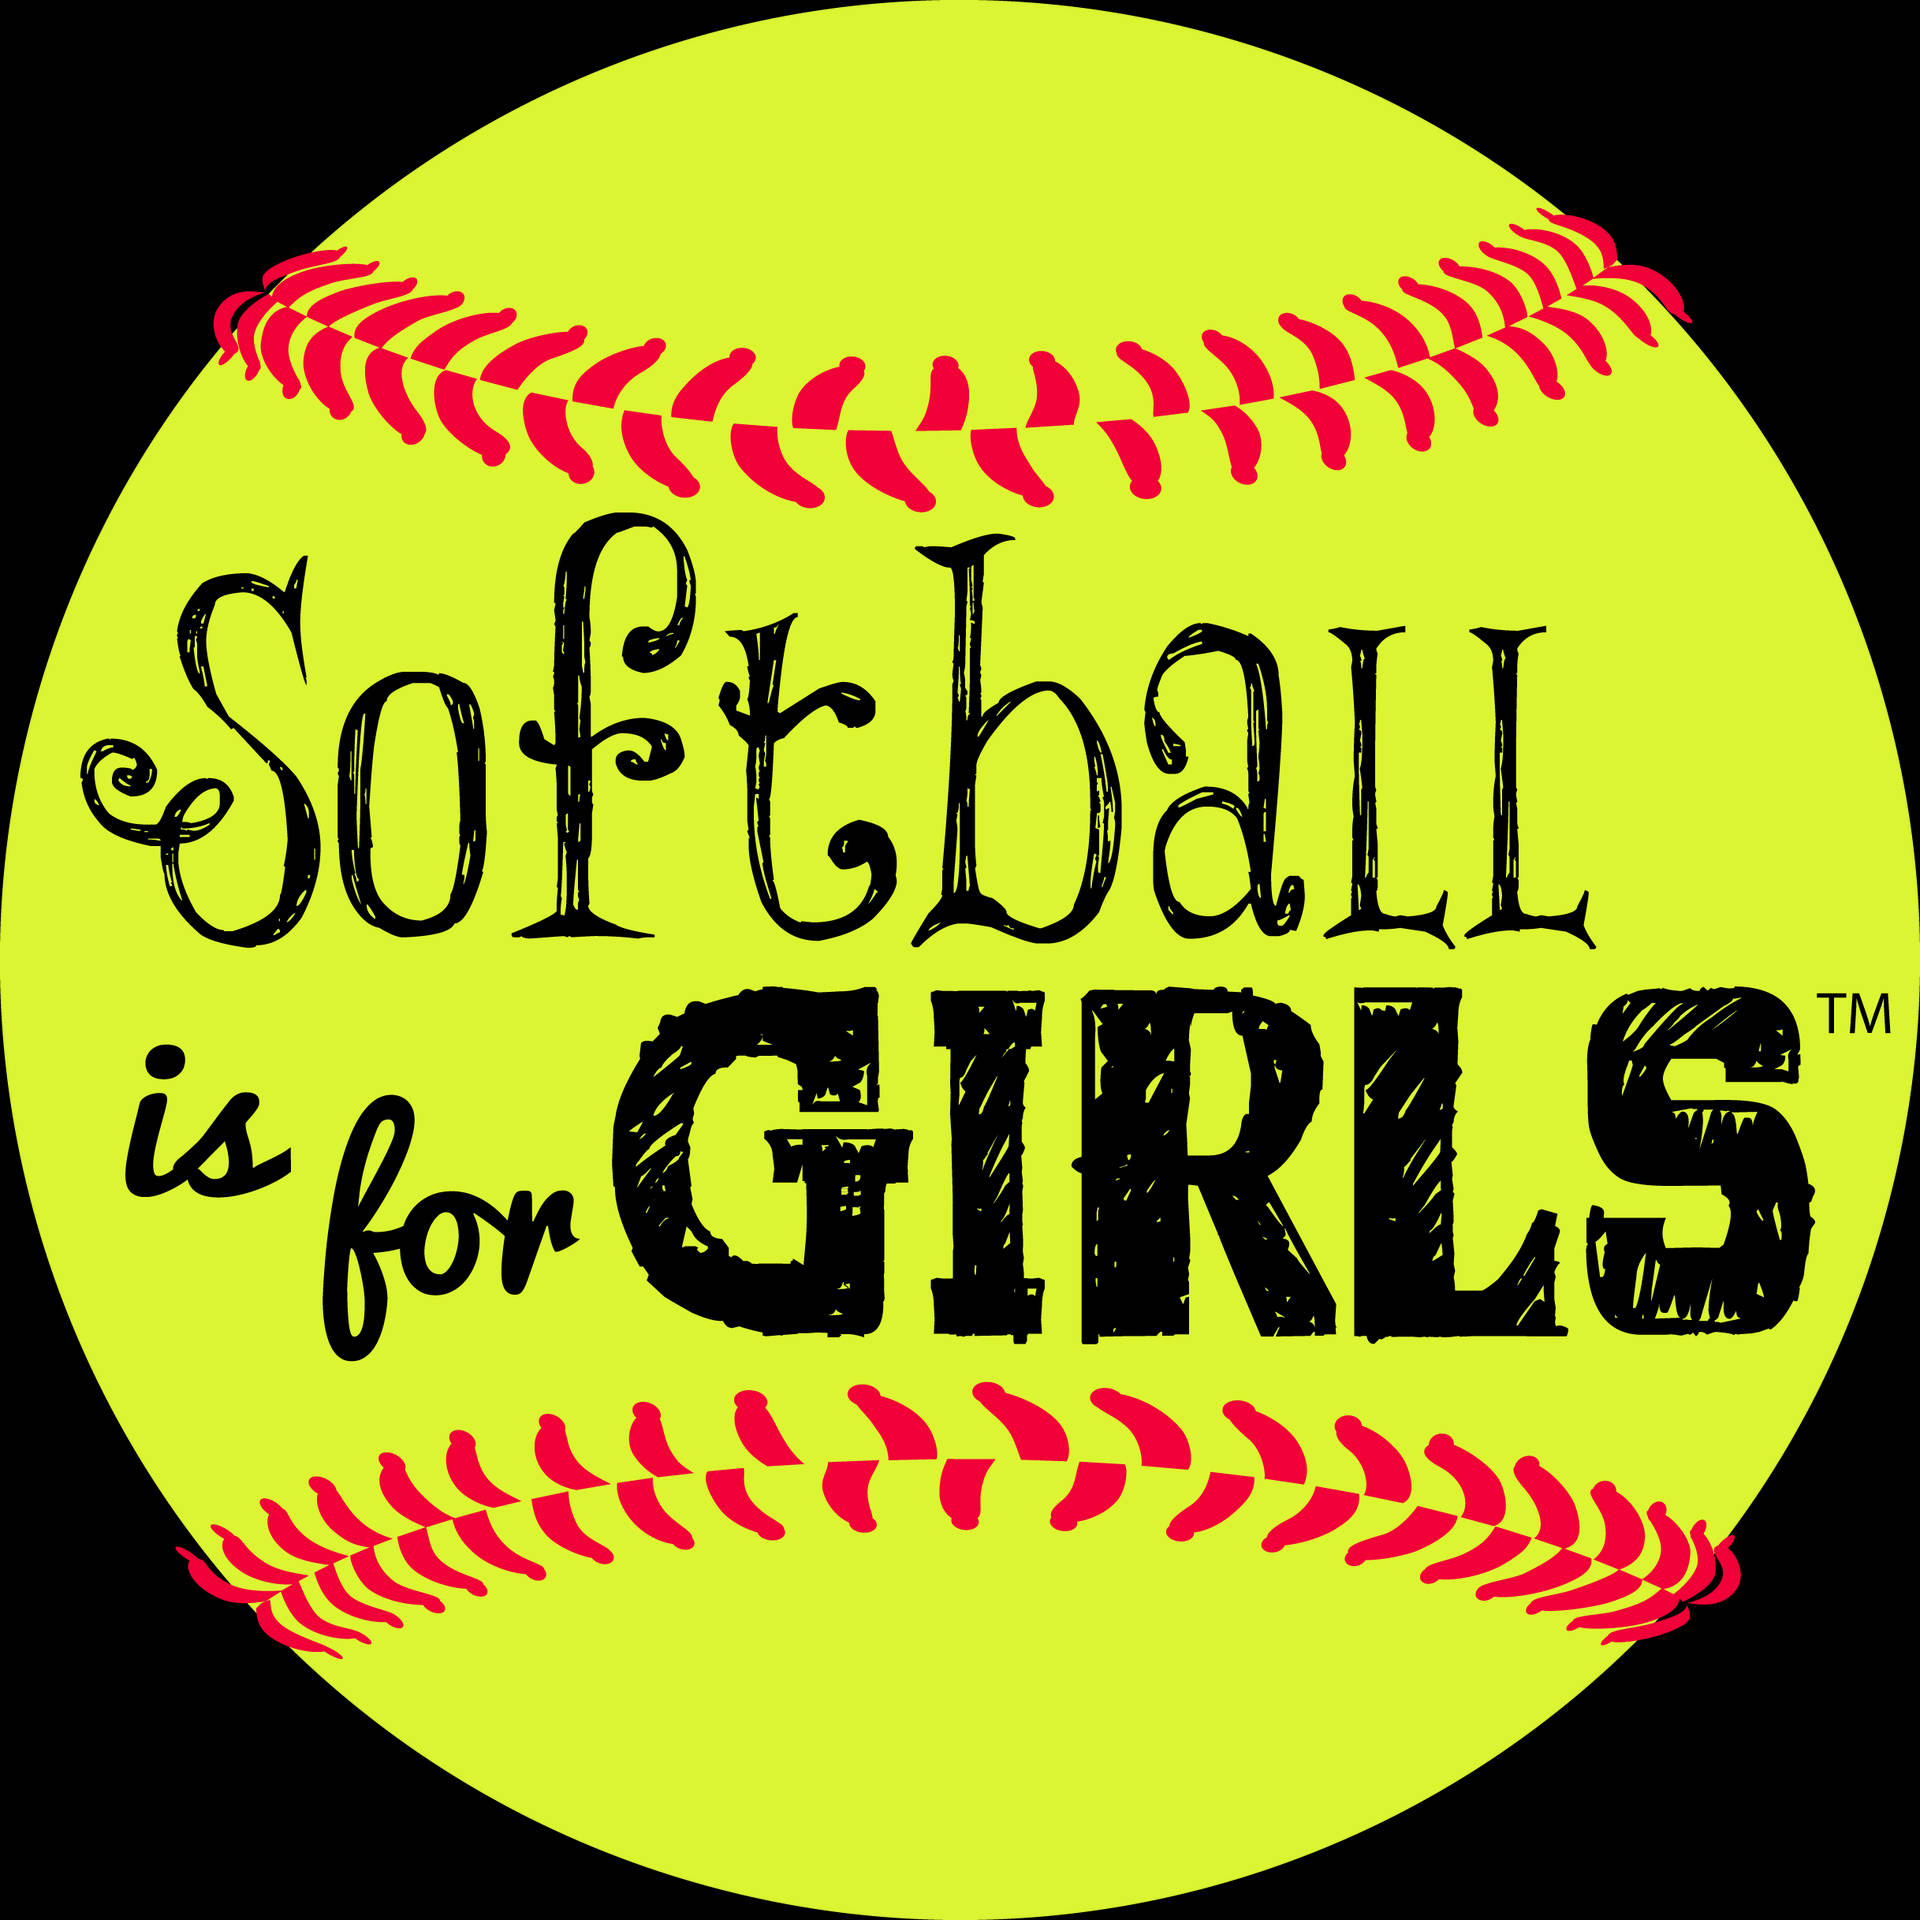 Softball 2435X2435 Wallpaper and Background Image